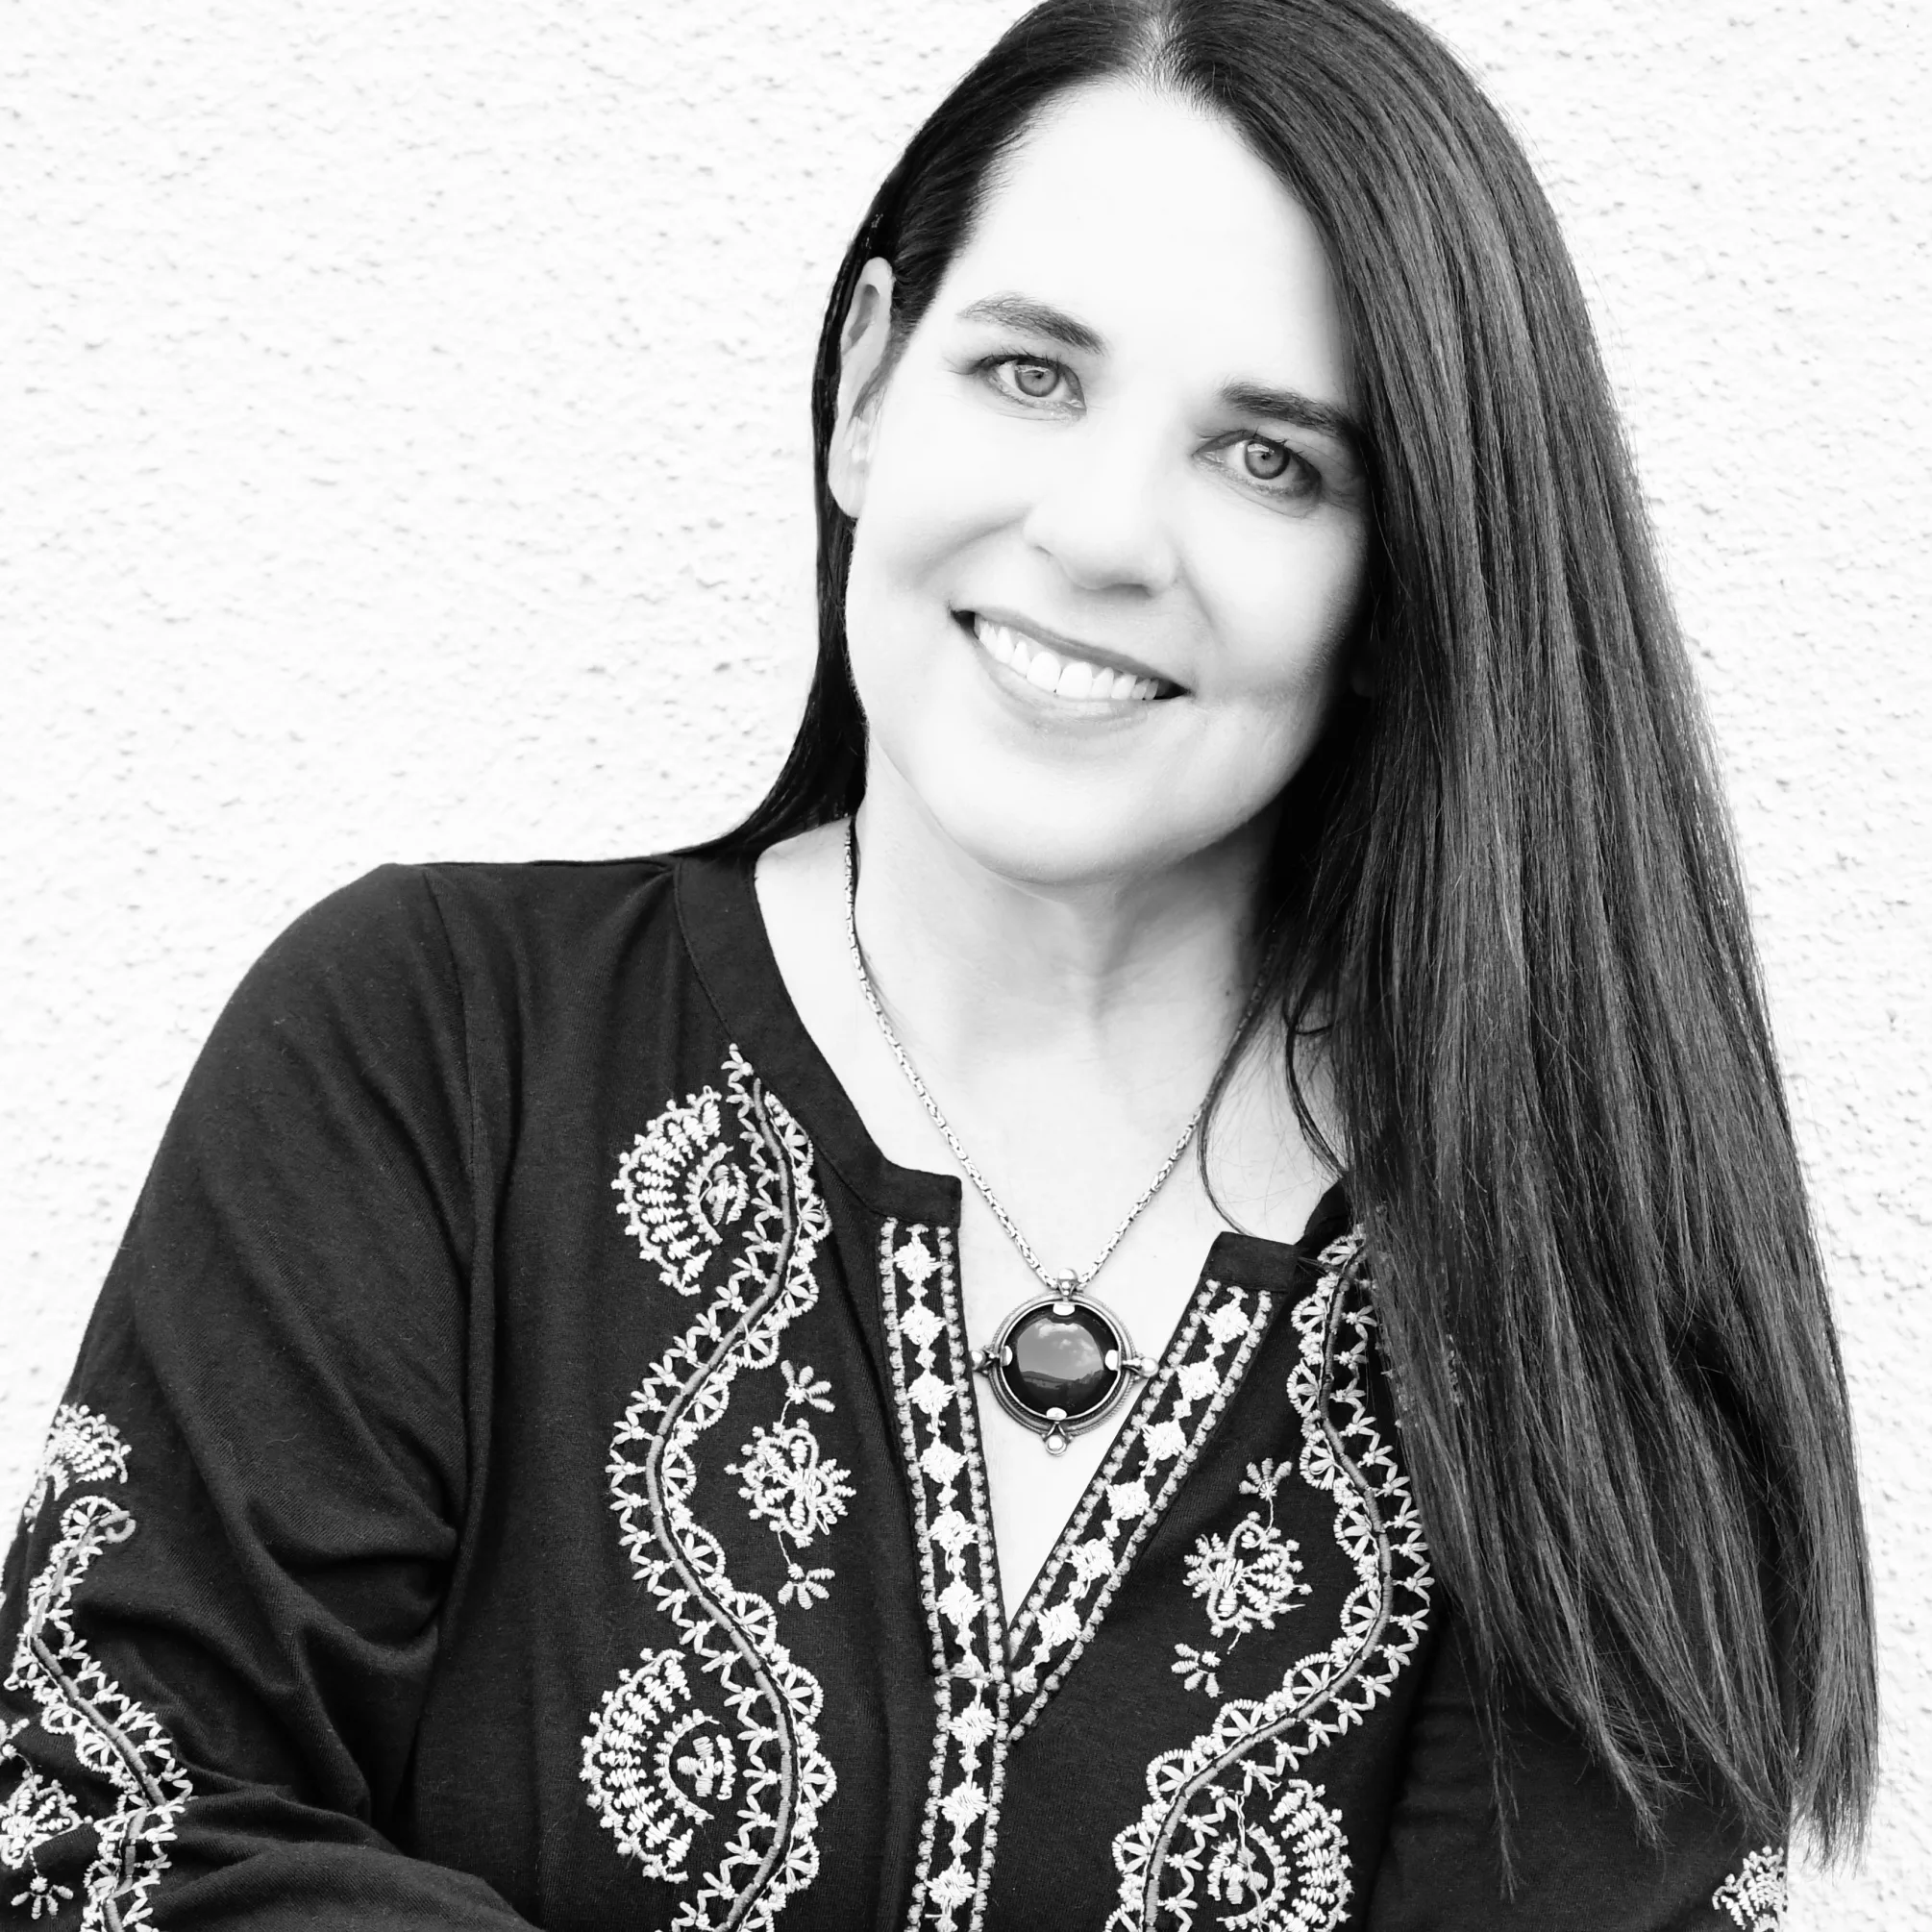 A black and white image of the CEO of Jackrabbit, Mary Maltbie, a smiling woman with long dark hair, necklace, dark blouse with detailed patterns along the seams, on a white background.